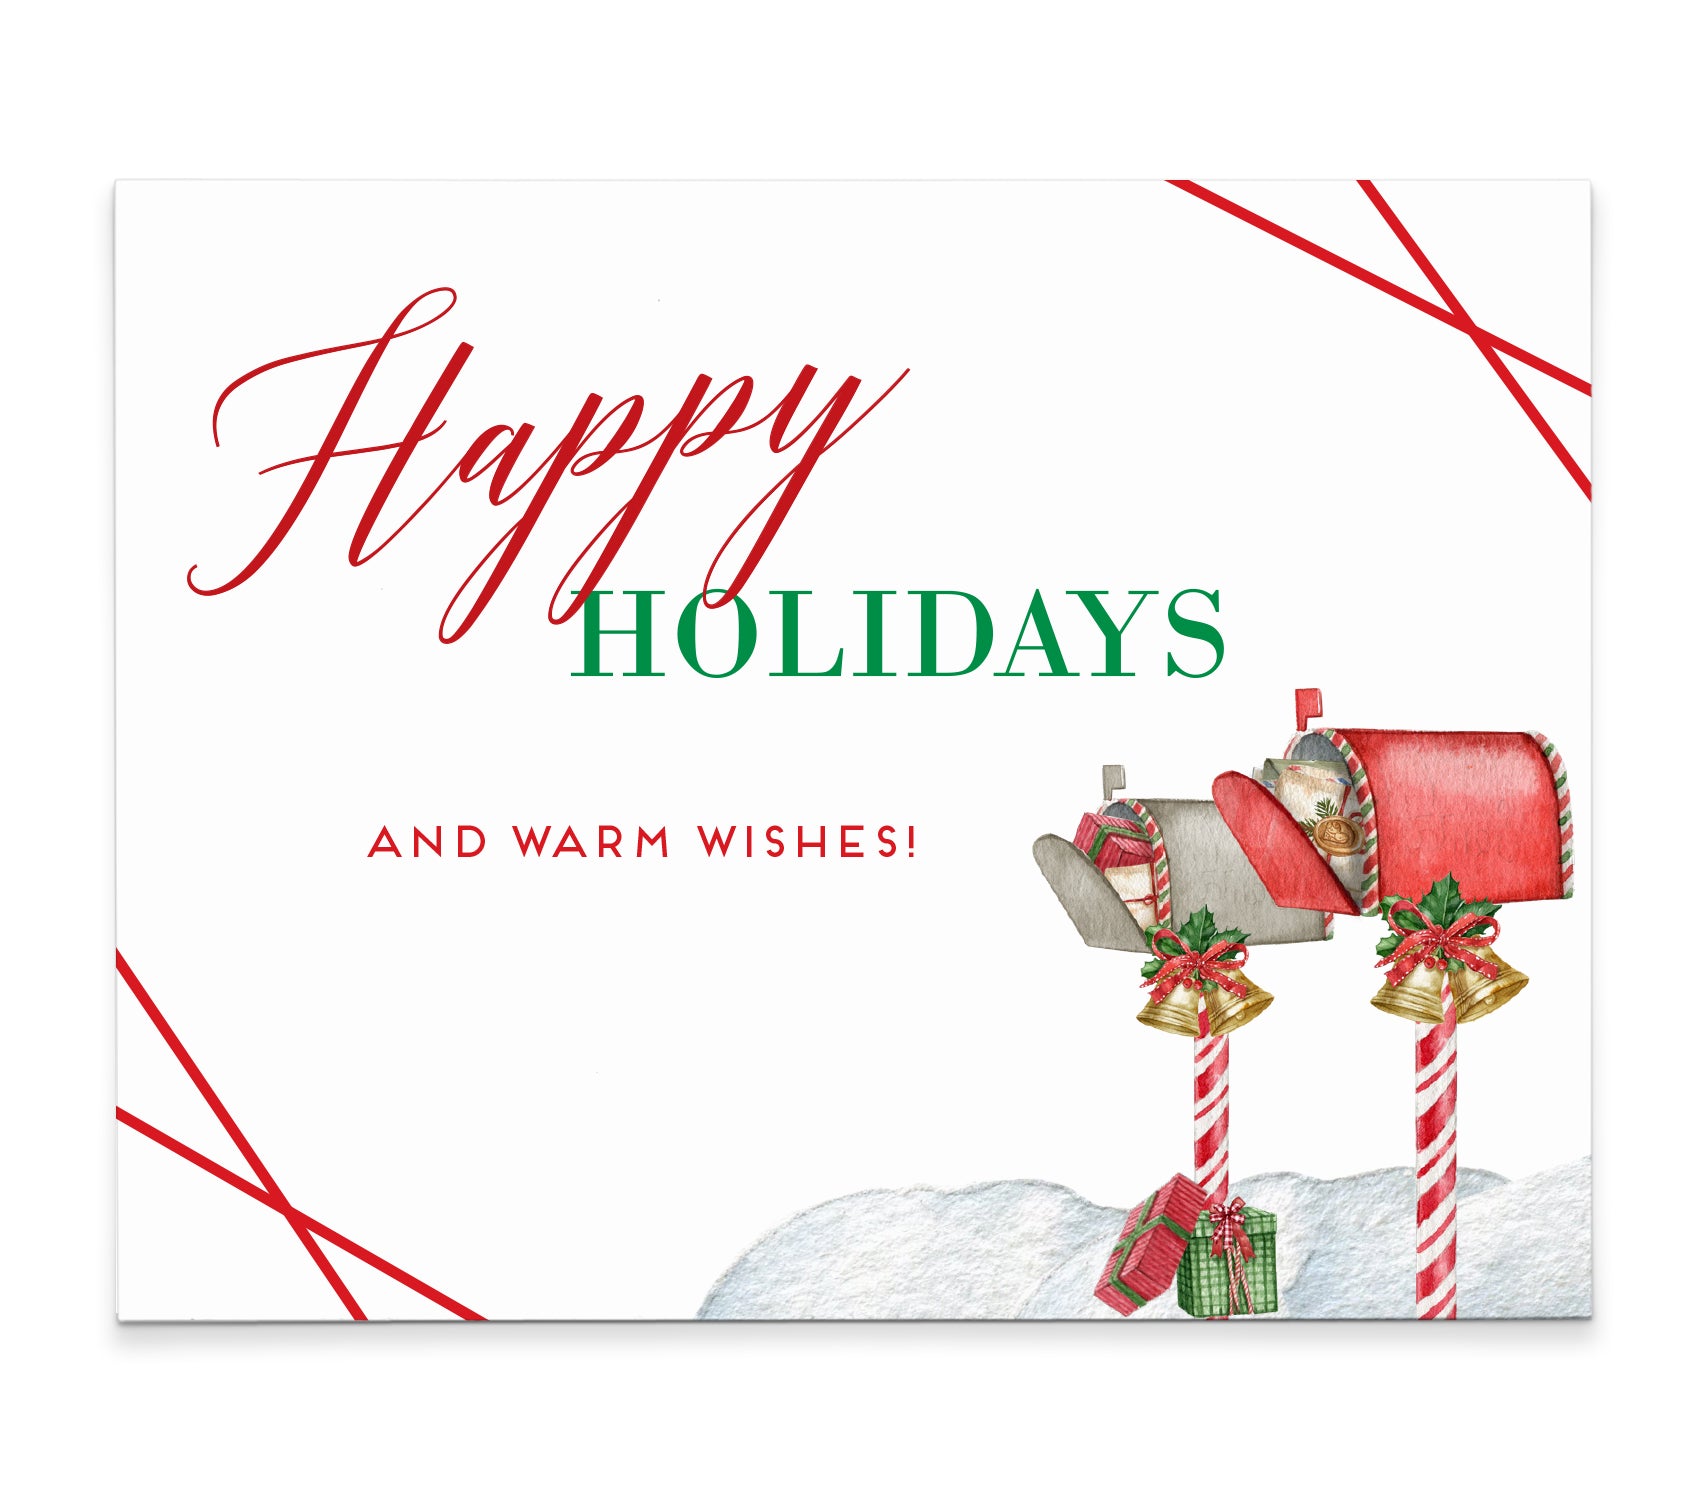 HGC014 Letter Carrier Thank You Cards with Mailboxes-and-Presents-usps postcards red green christmas holiday